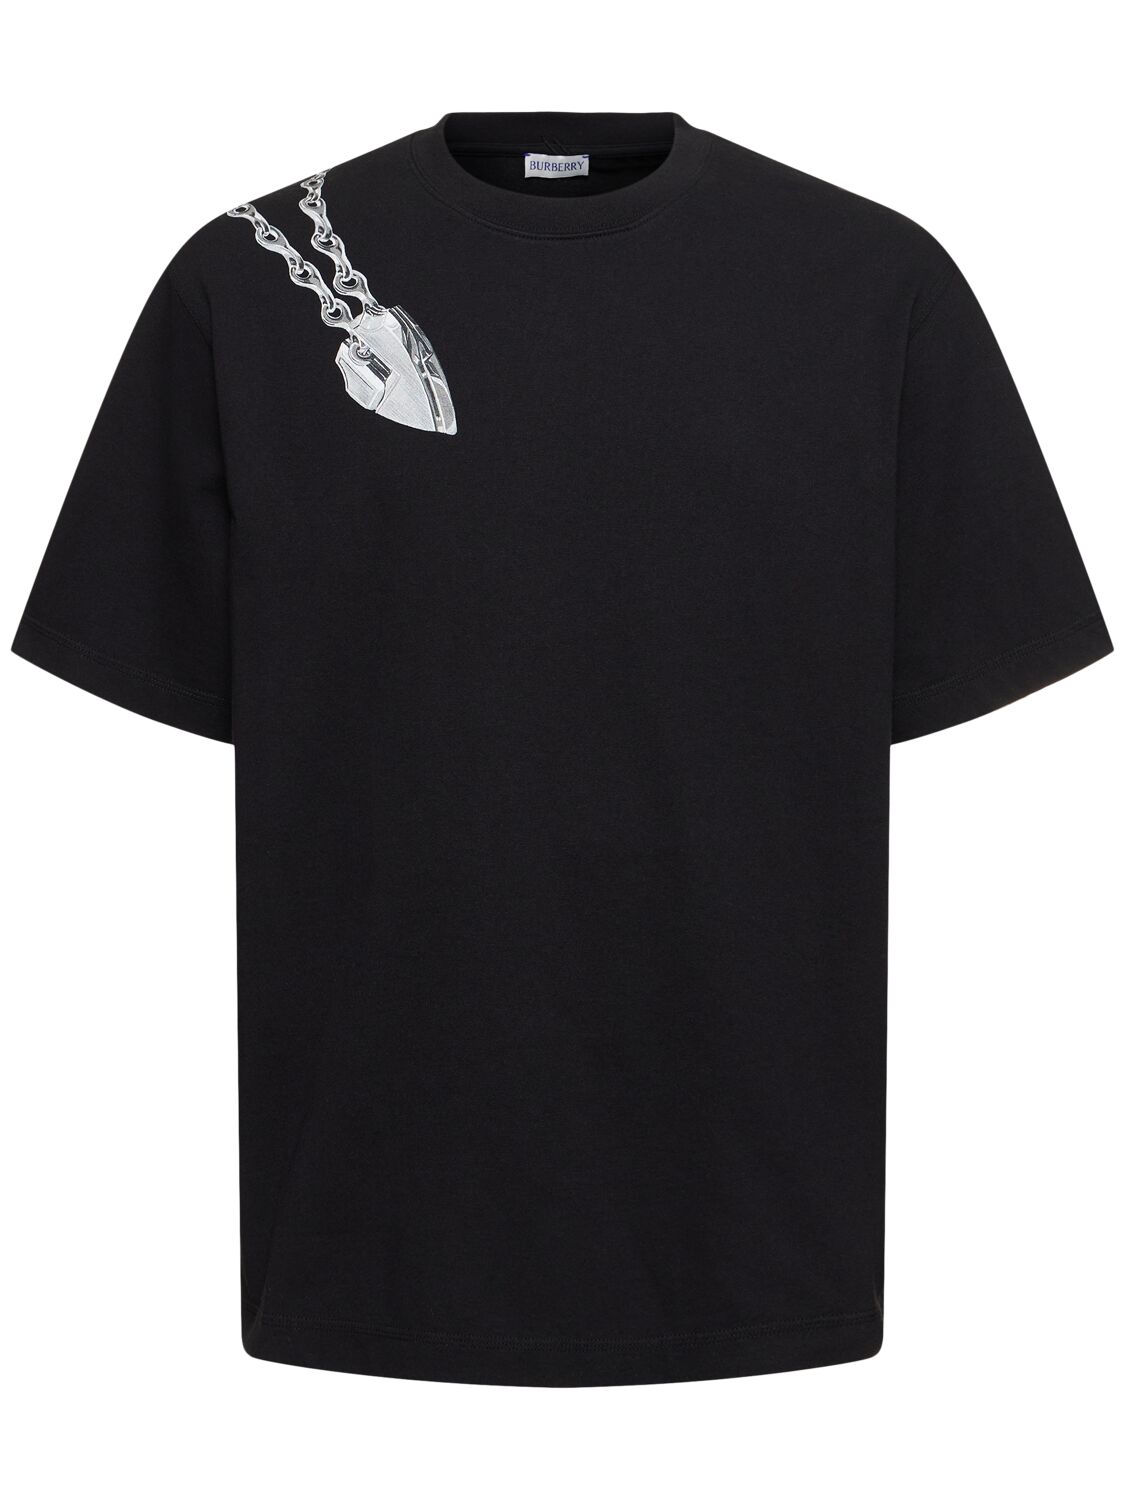 Burberry Printed Cotton T-shirt In Black